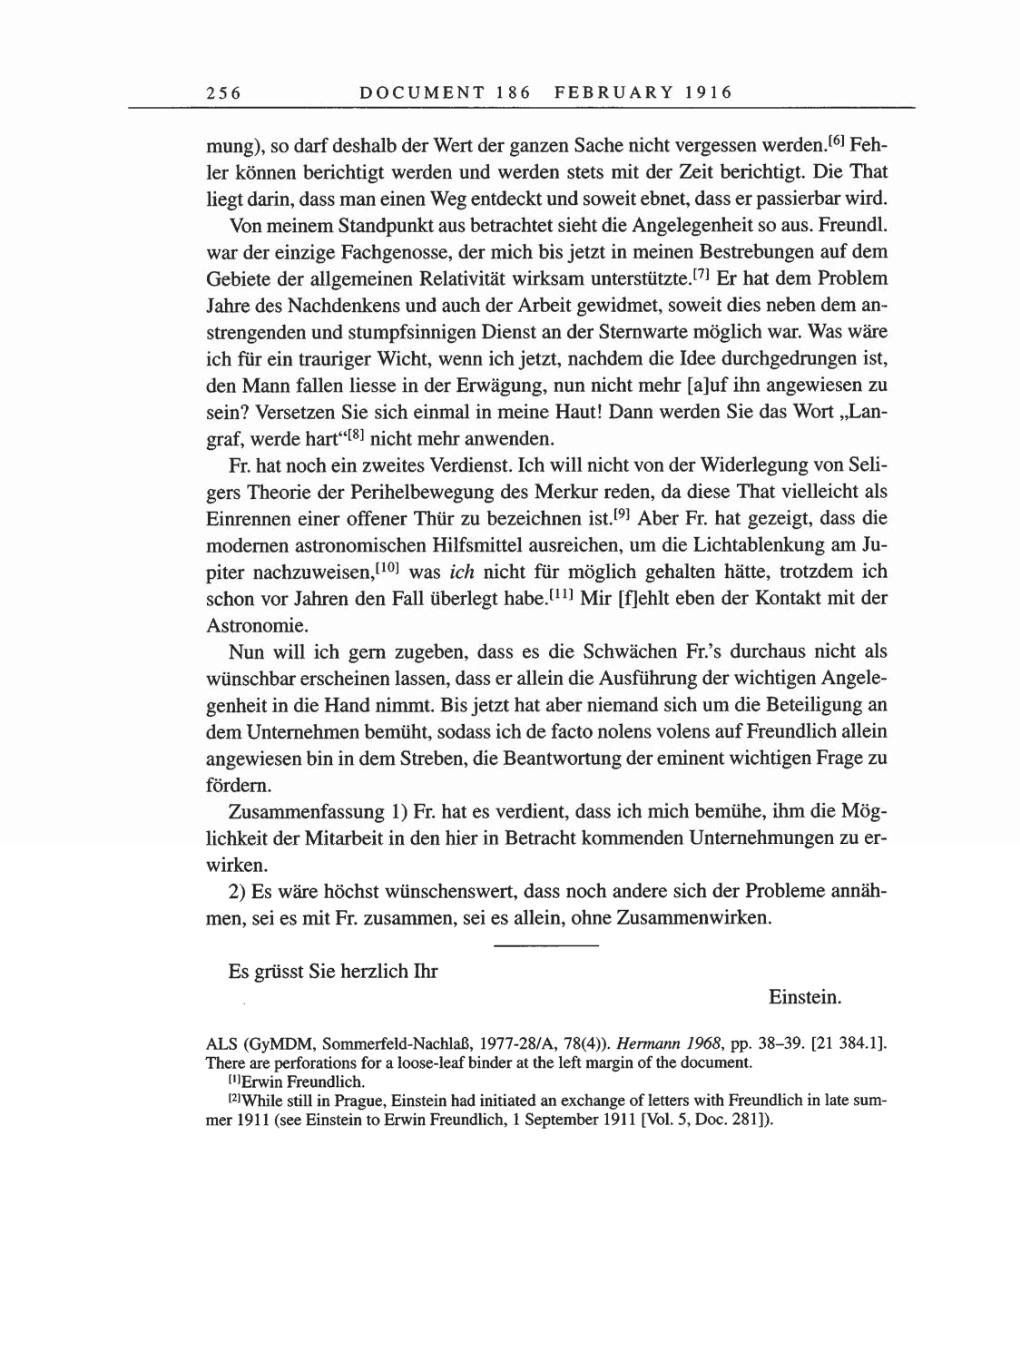 Volume 8, Part A: The Berlin Years: Correspondence 1914-1917 page 256